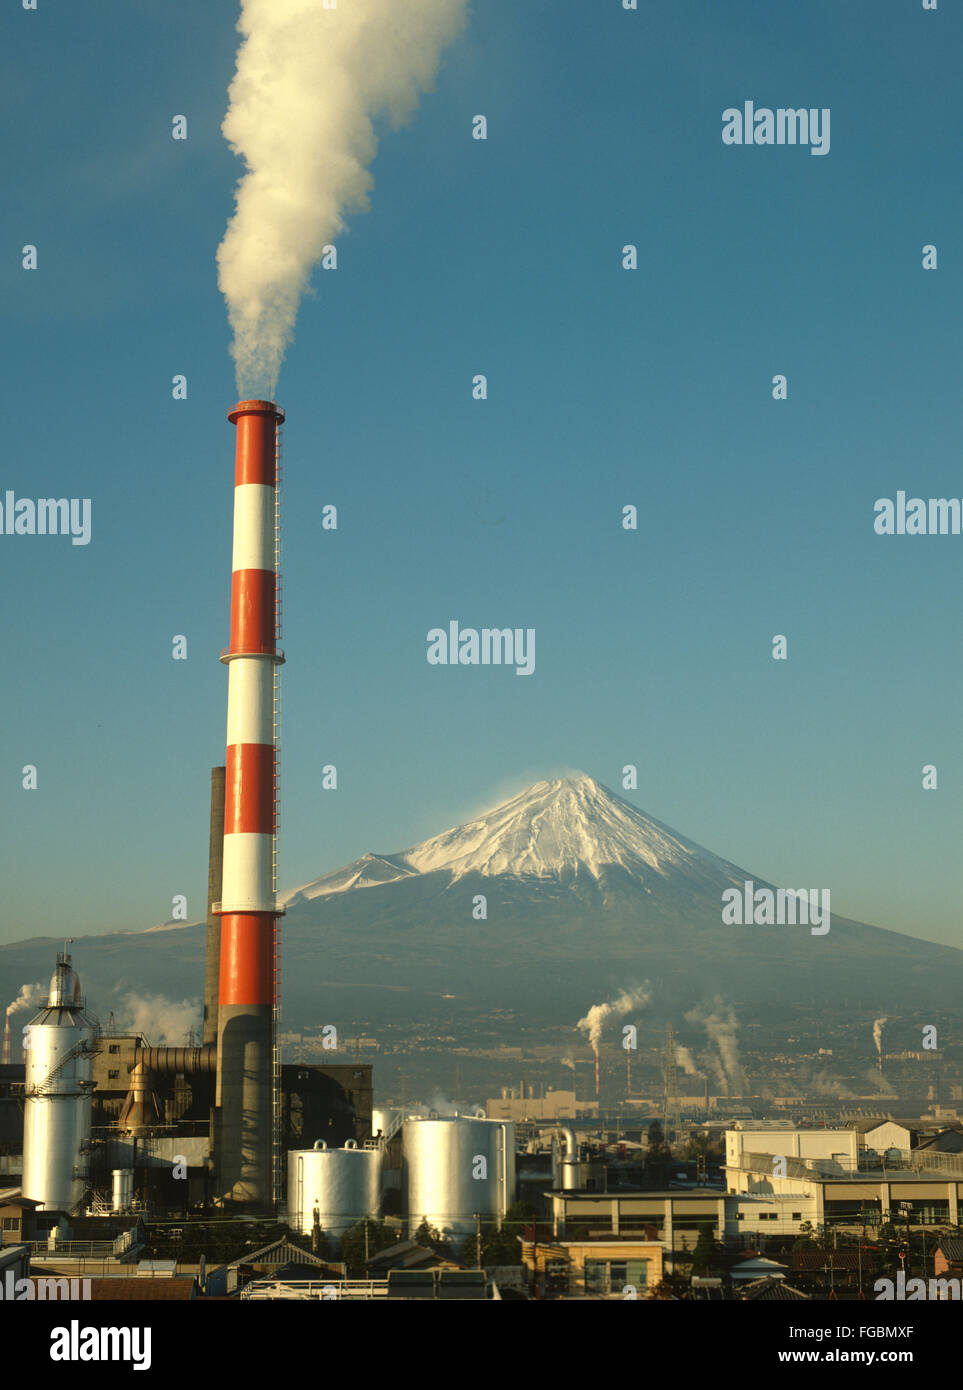 Mt. Fuji with factories, Japan. Stock Photo